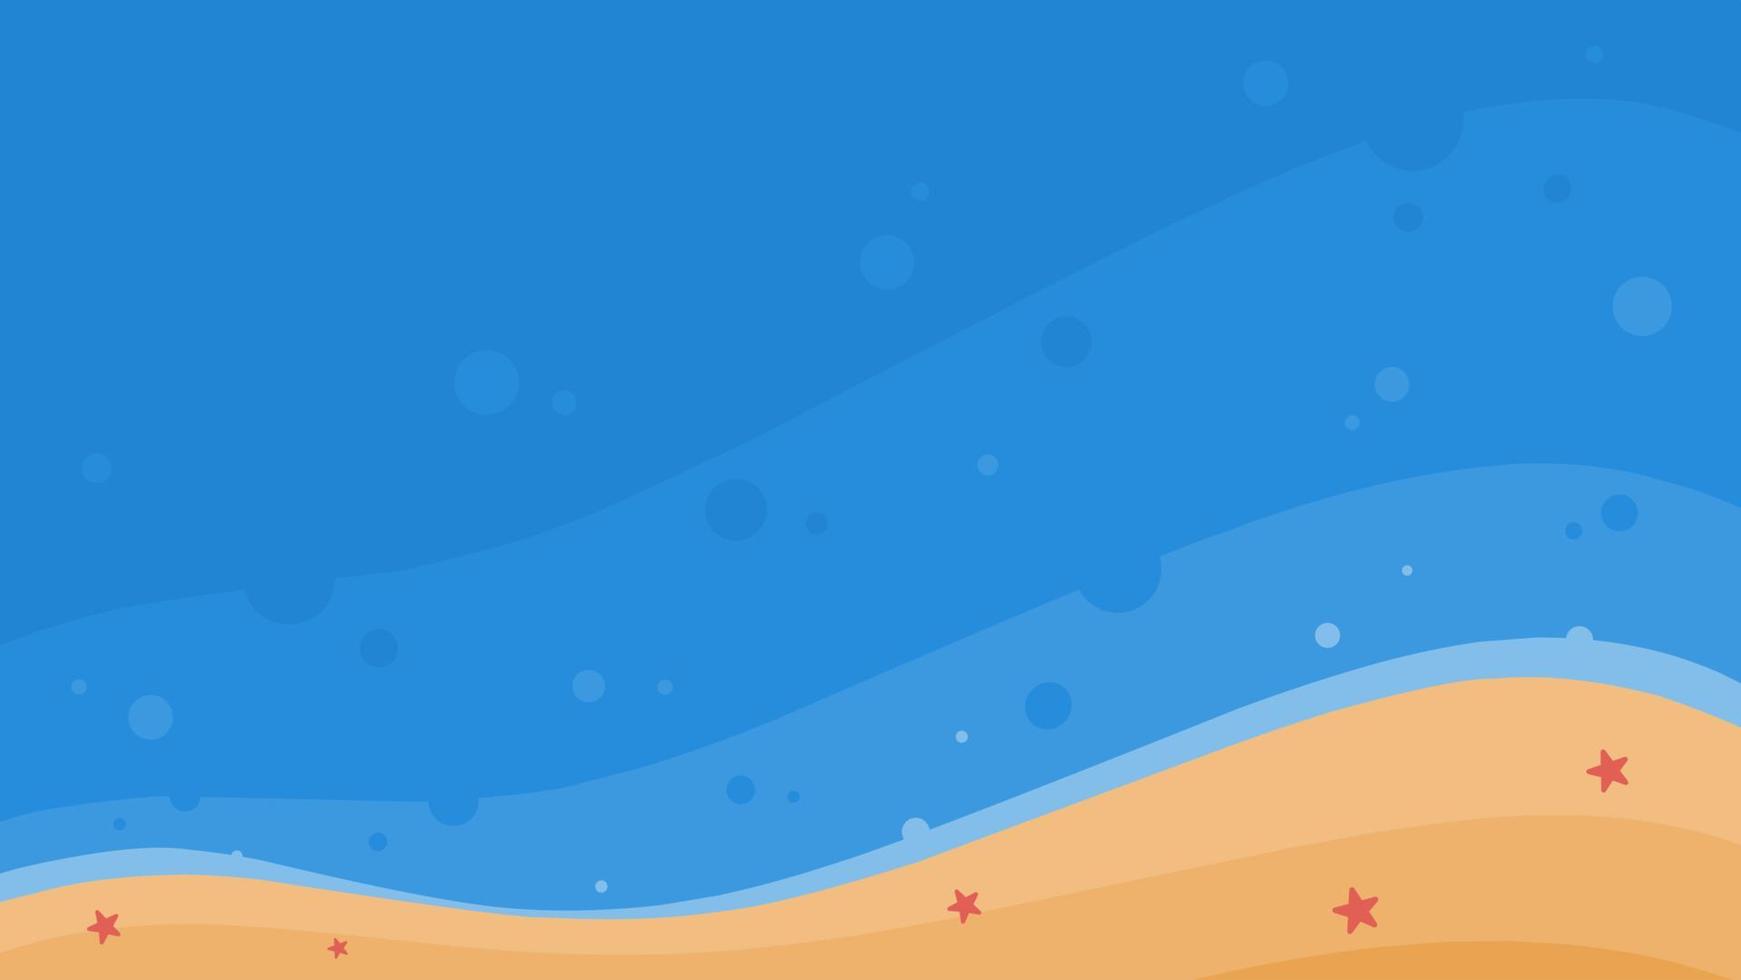 top view beach flat illustration background with blue wavy sea and some starfish vector